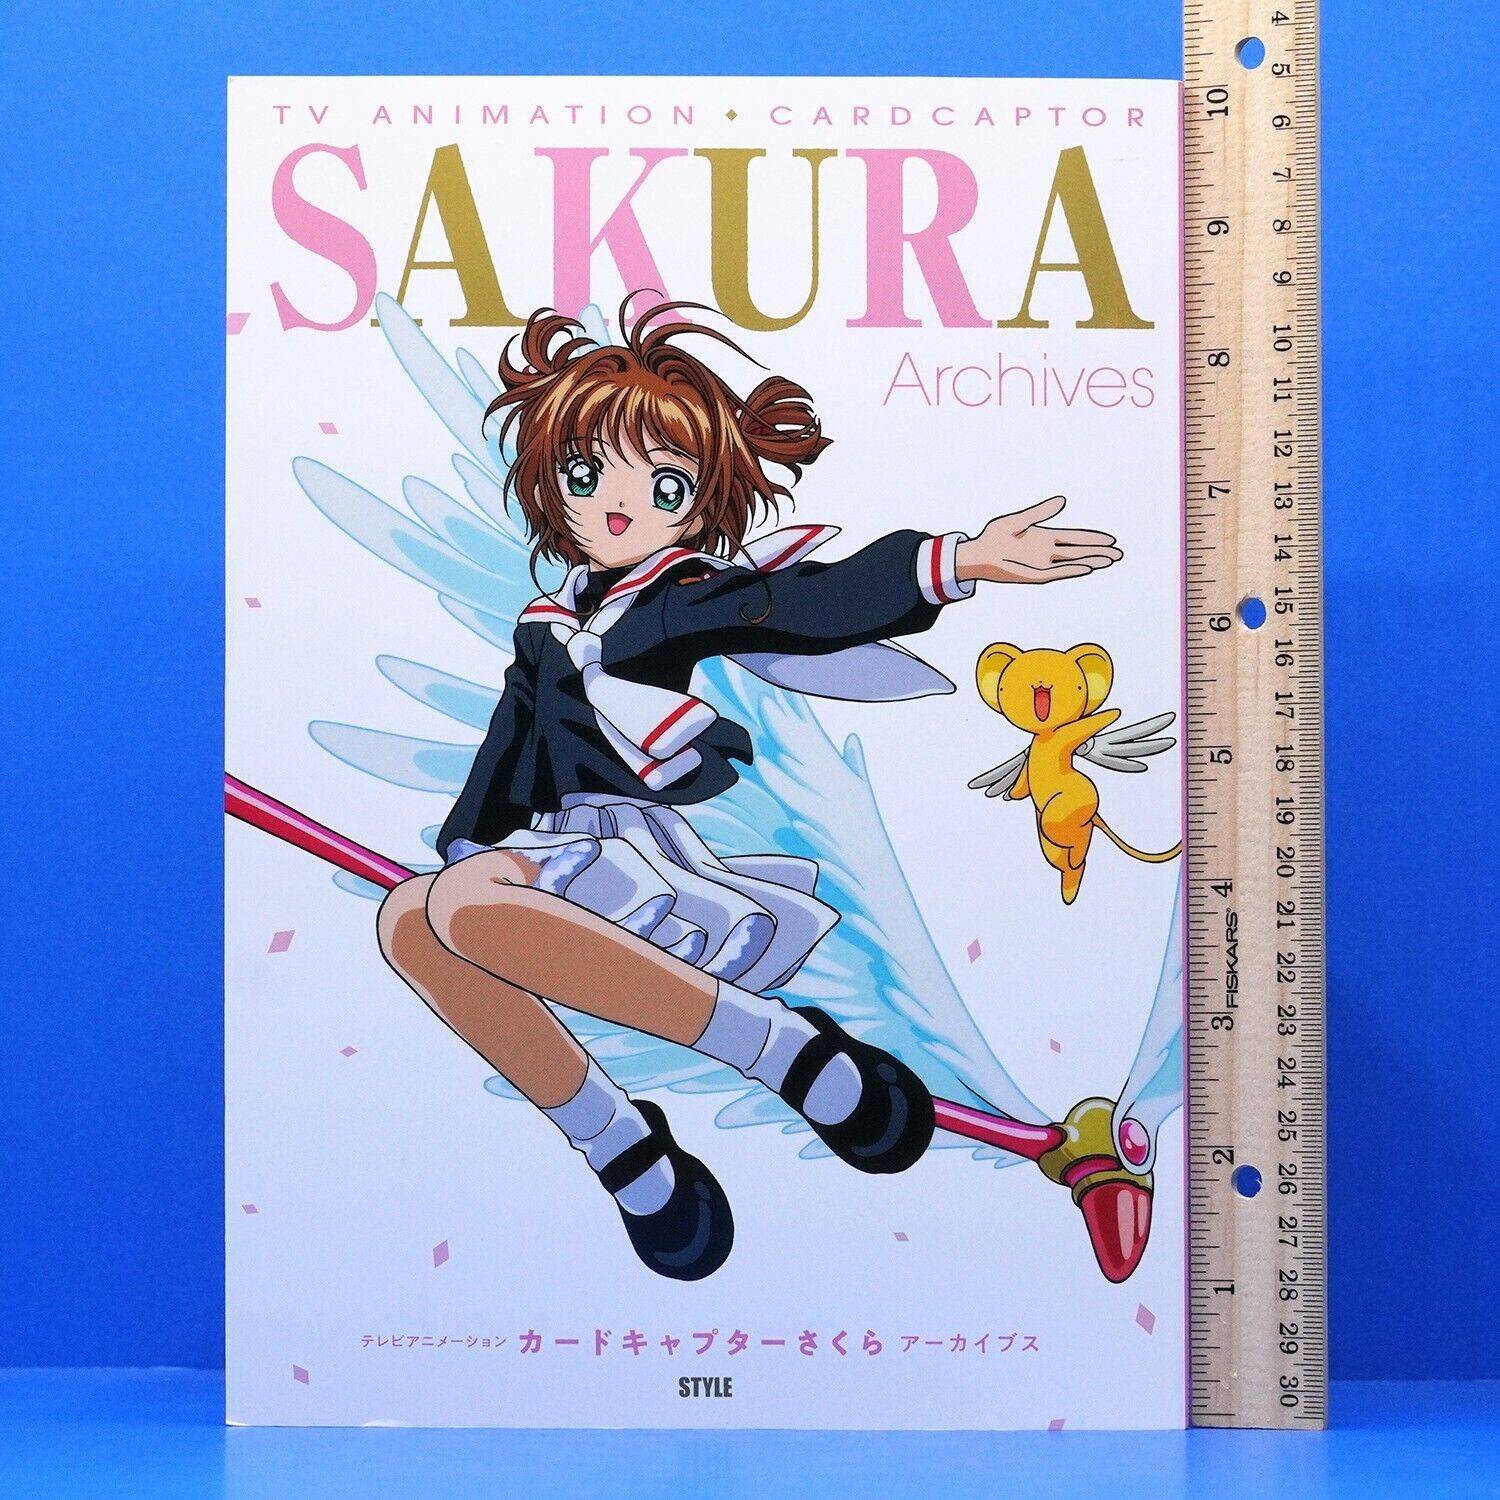 Primary image for Cardcaptor Sakura Archives TV Animation Anime Art Book - 536 pages!